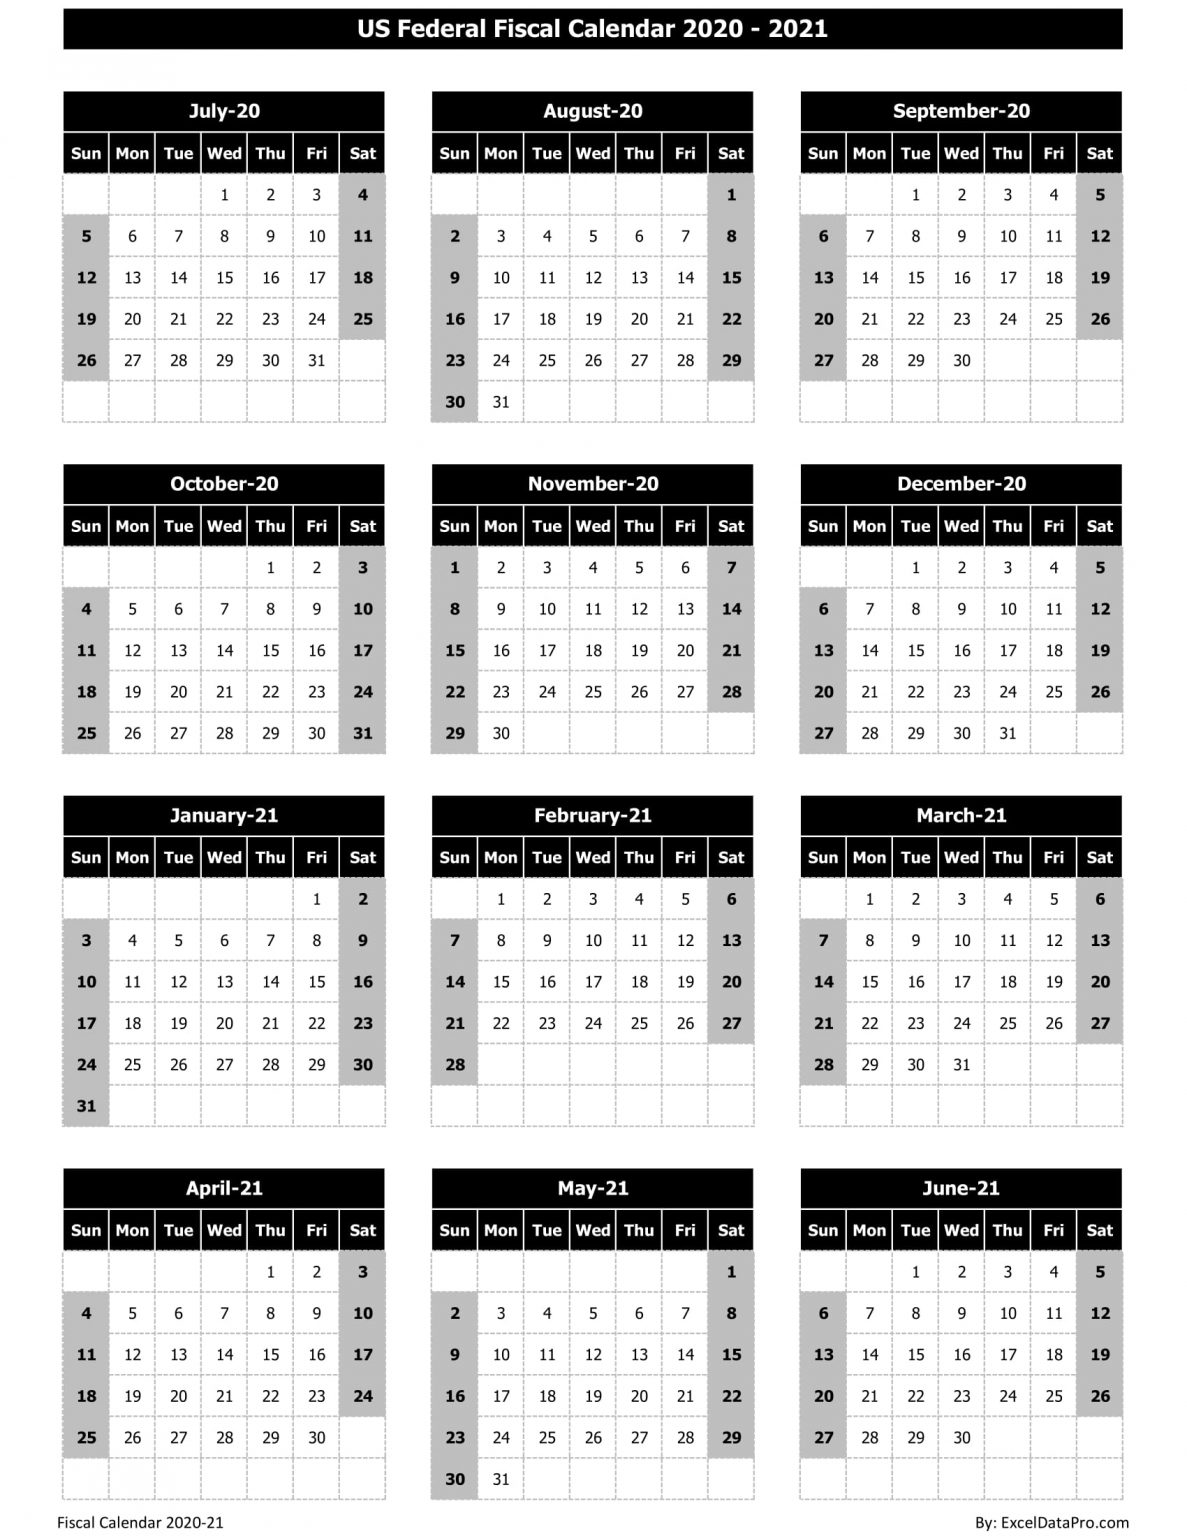 Download US Federal Fiscal Calendar 202021 Excel Template ExcelDataPro